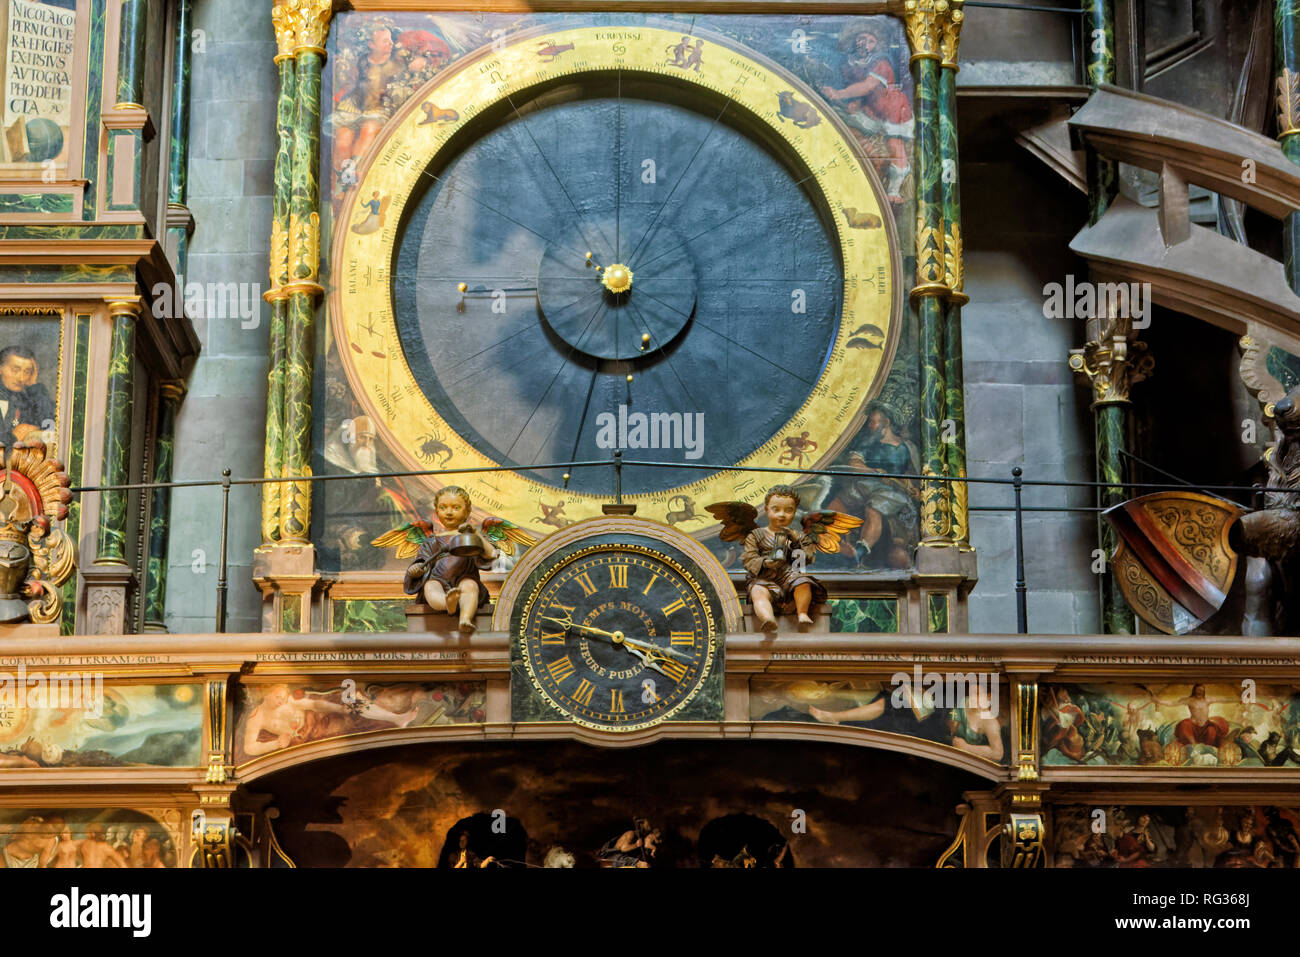 the Orrery of The astronomical clock inside the Cathédrale Notre-Dame in Strasbourg, France Stock Photo